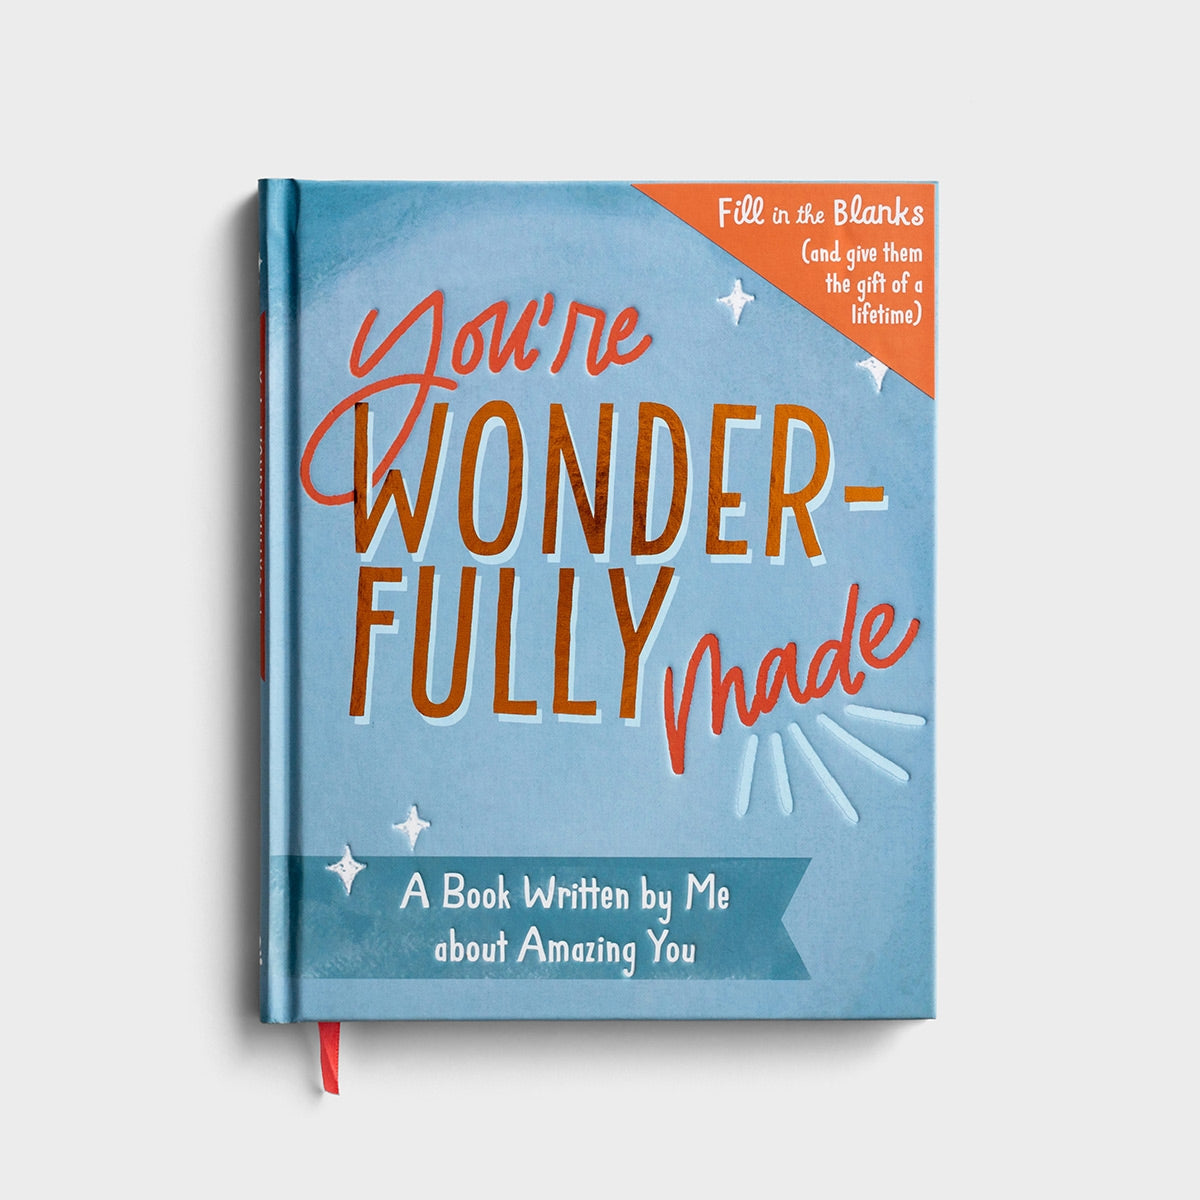 You're Wonderfully Made-A Book Written By Me about Amazing You